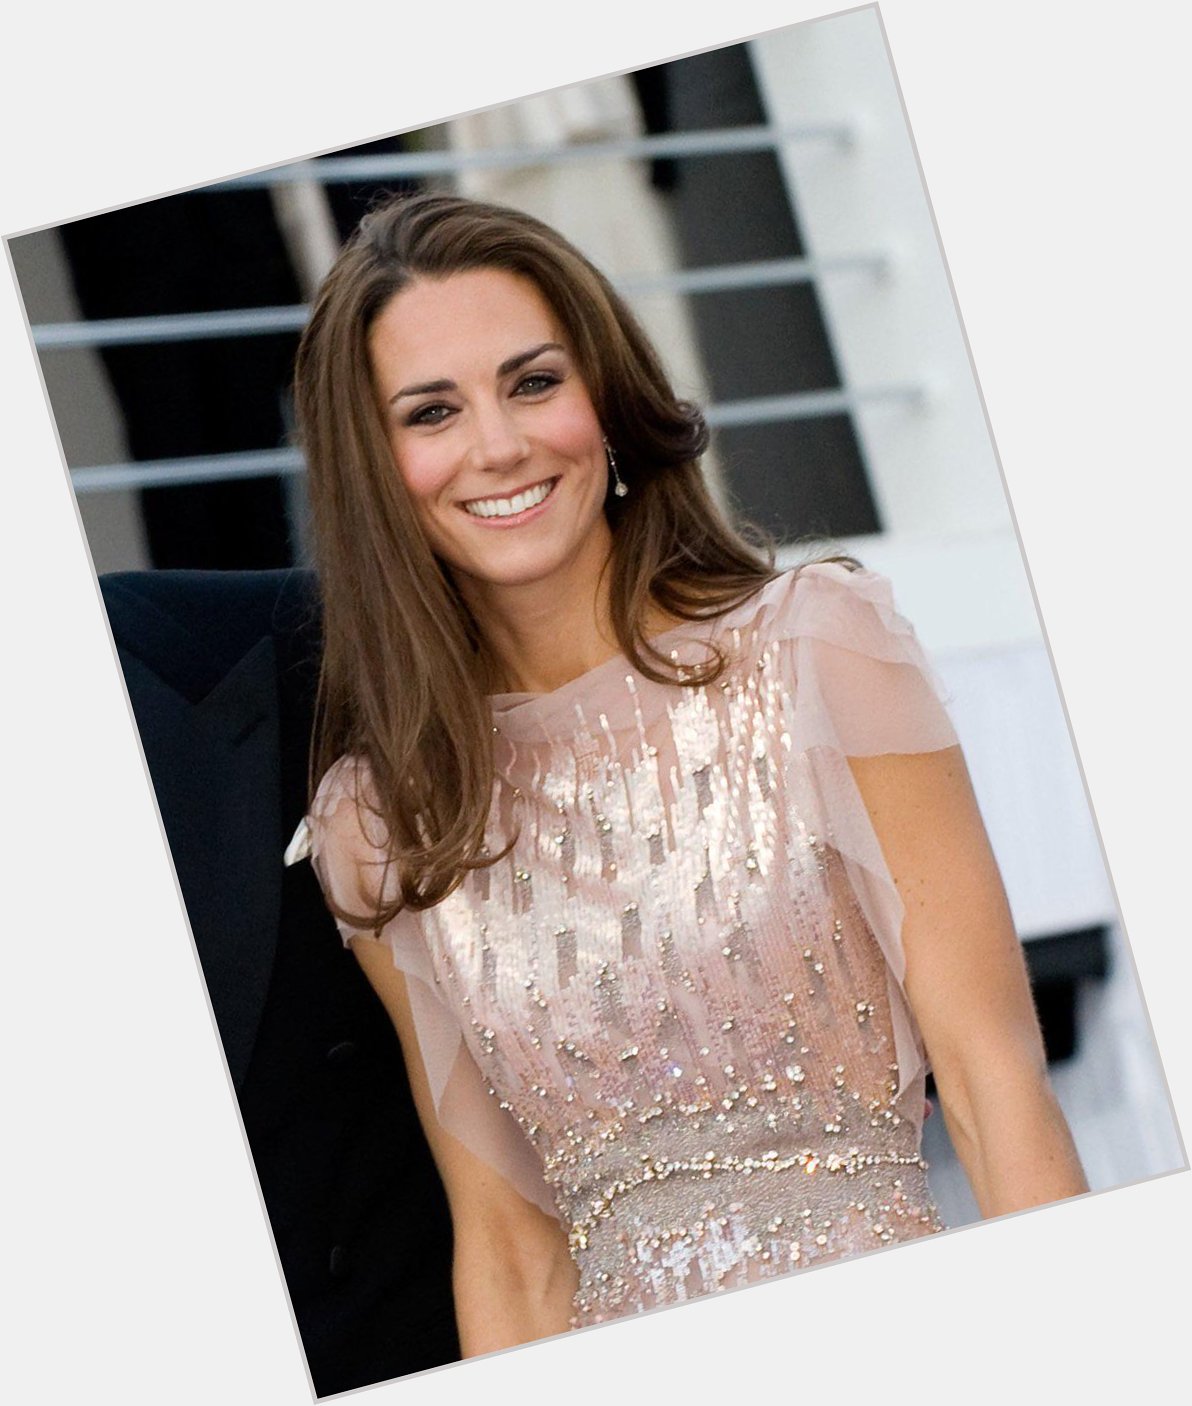 Happy birthday to one of our favorite style icons, Dutchess Kate!  